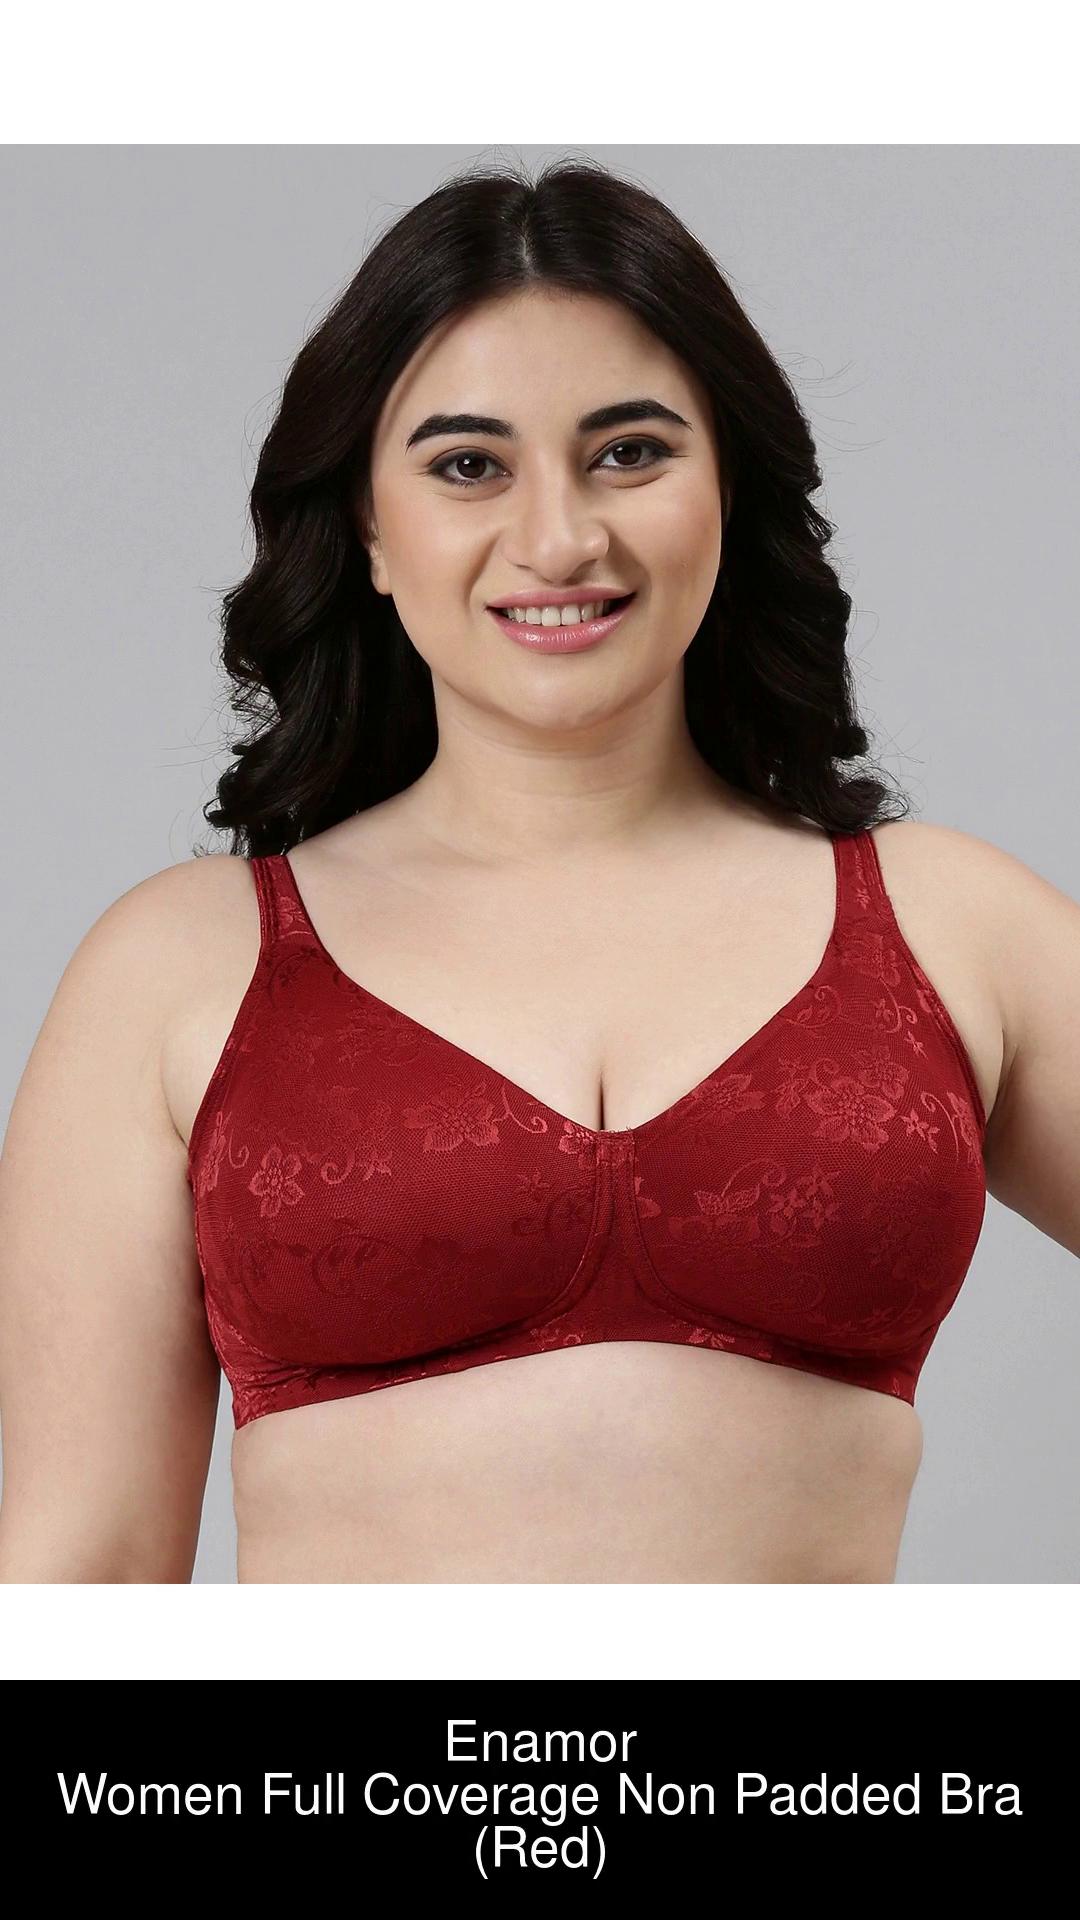 Enamor F135 Full Support Lace Bra High Coverage Non Padded Wirefree Red 38C  in Mumbai - Dealers, Manufacturers & Suppliers - Justdial